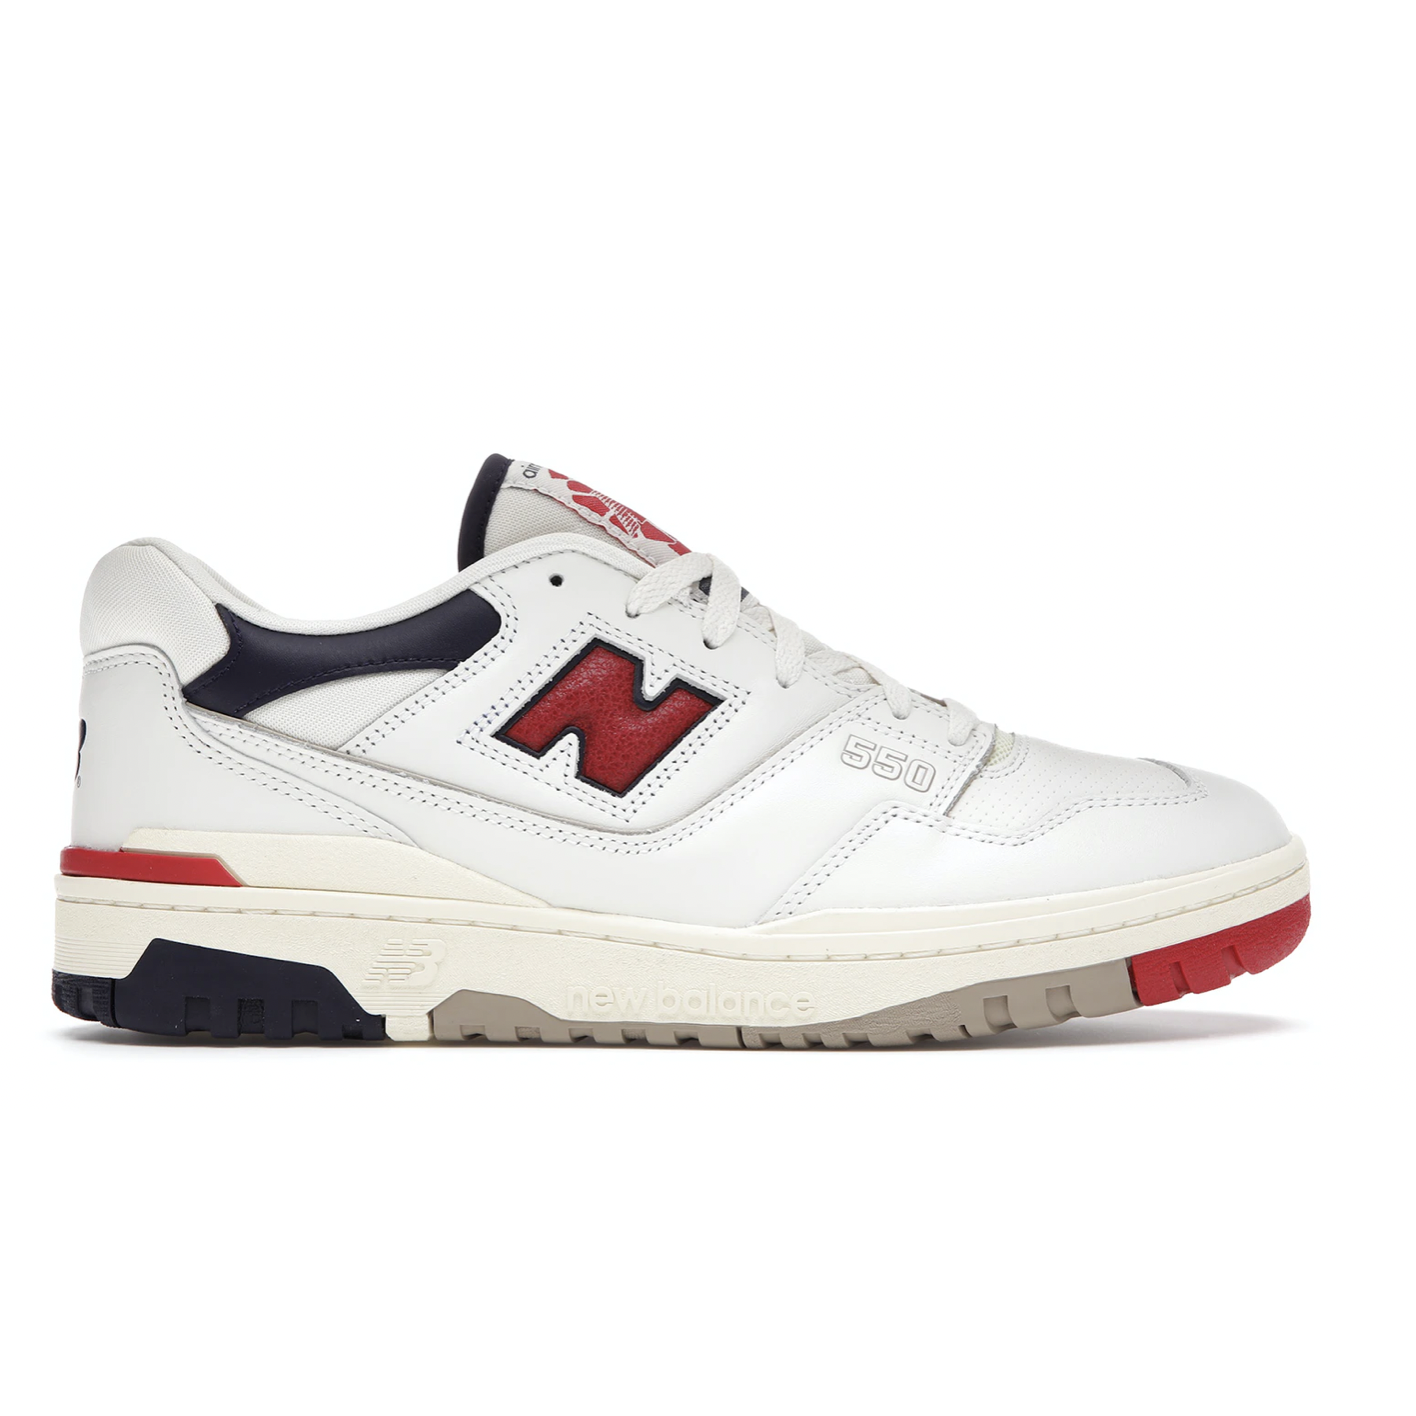 New Balance 550 Aime Leon Dore White Navy Red from New Balance